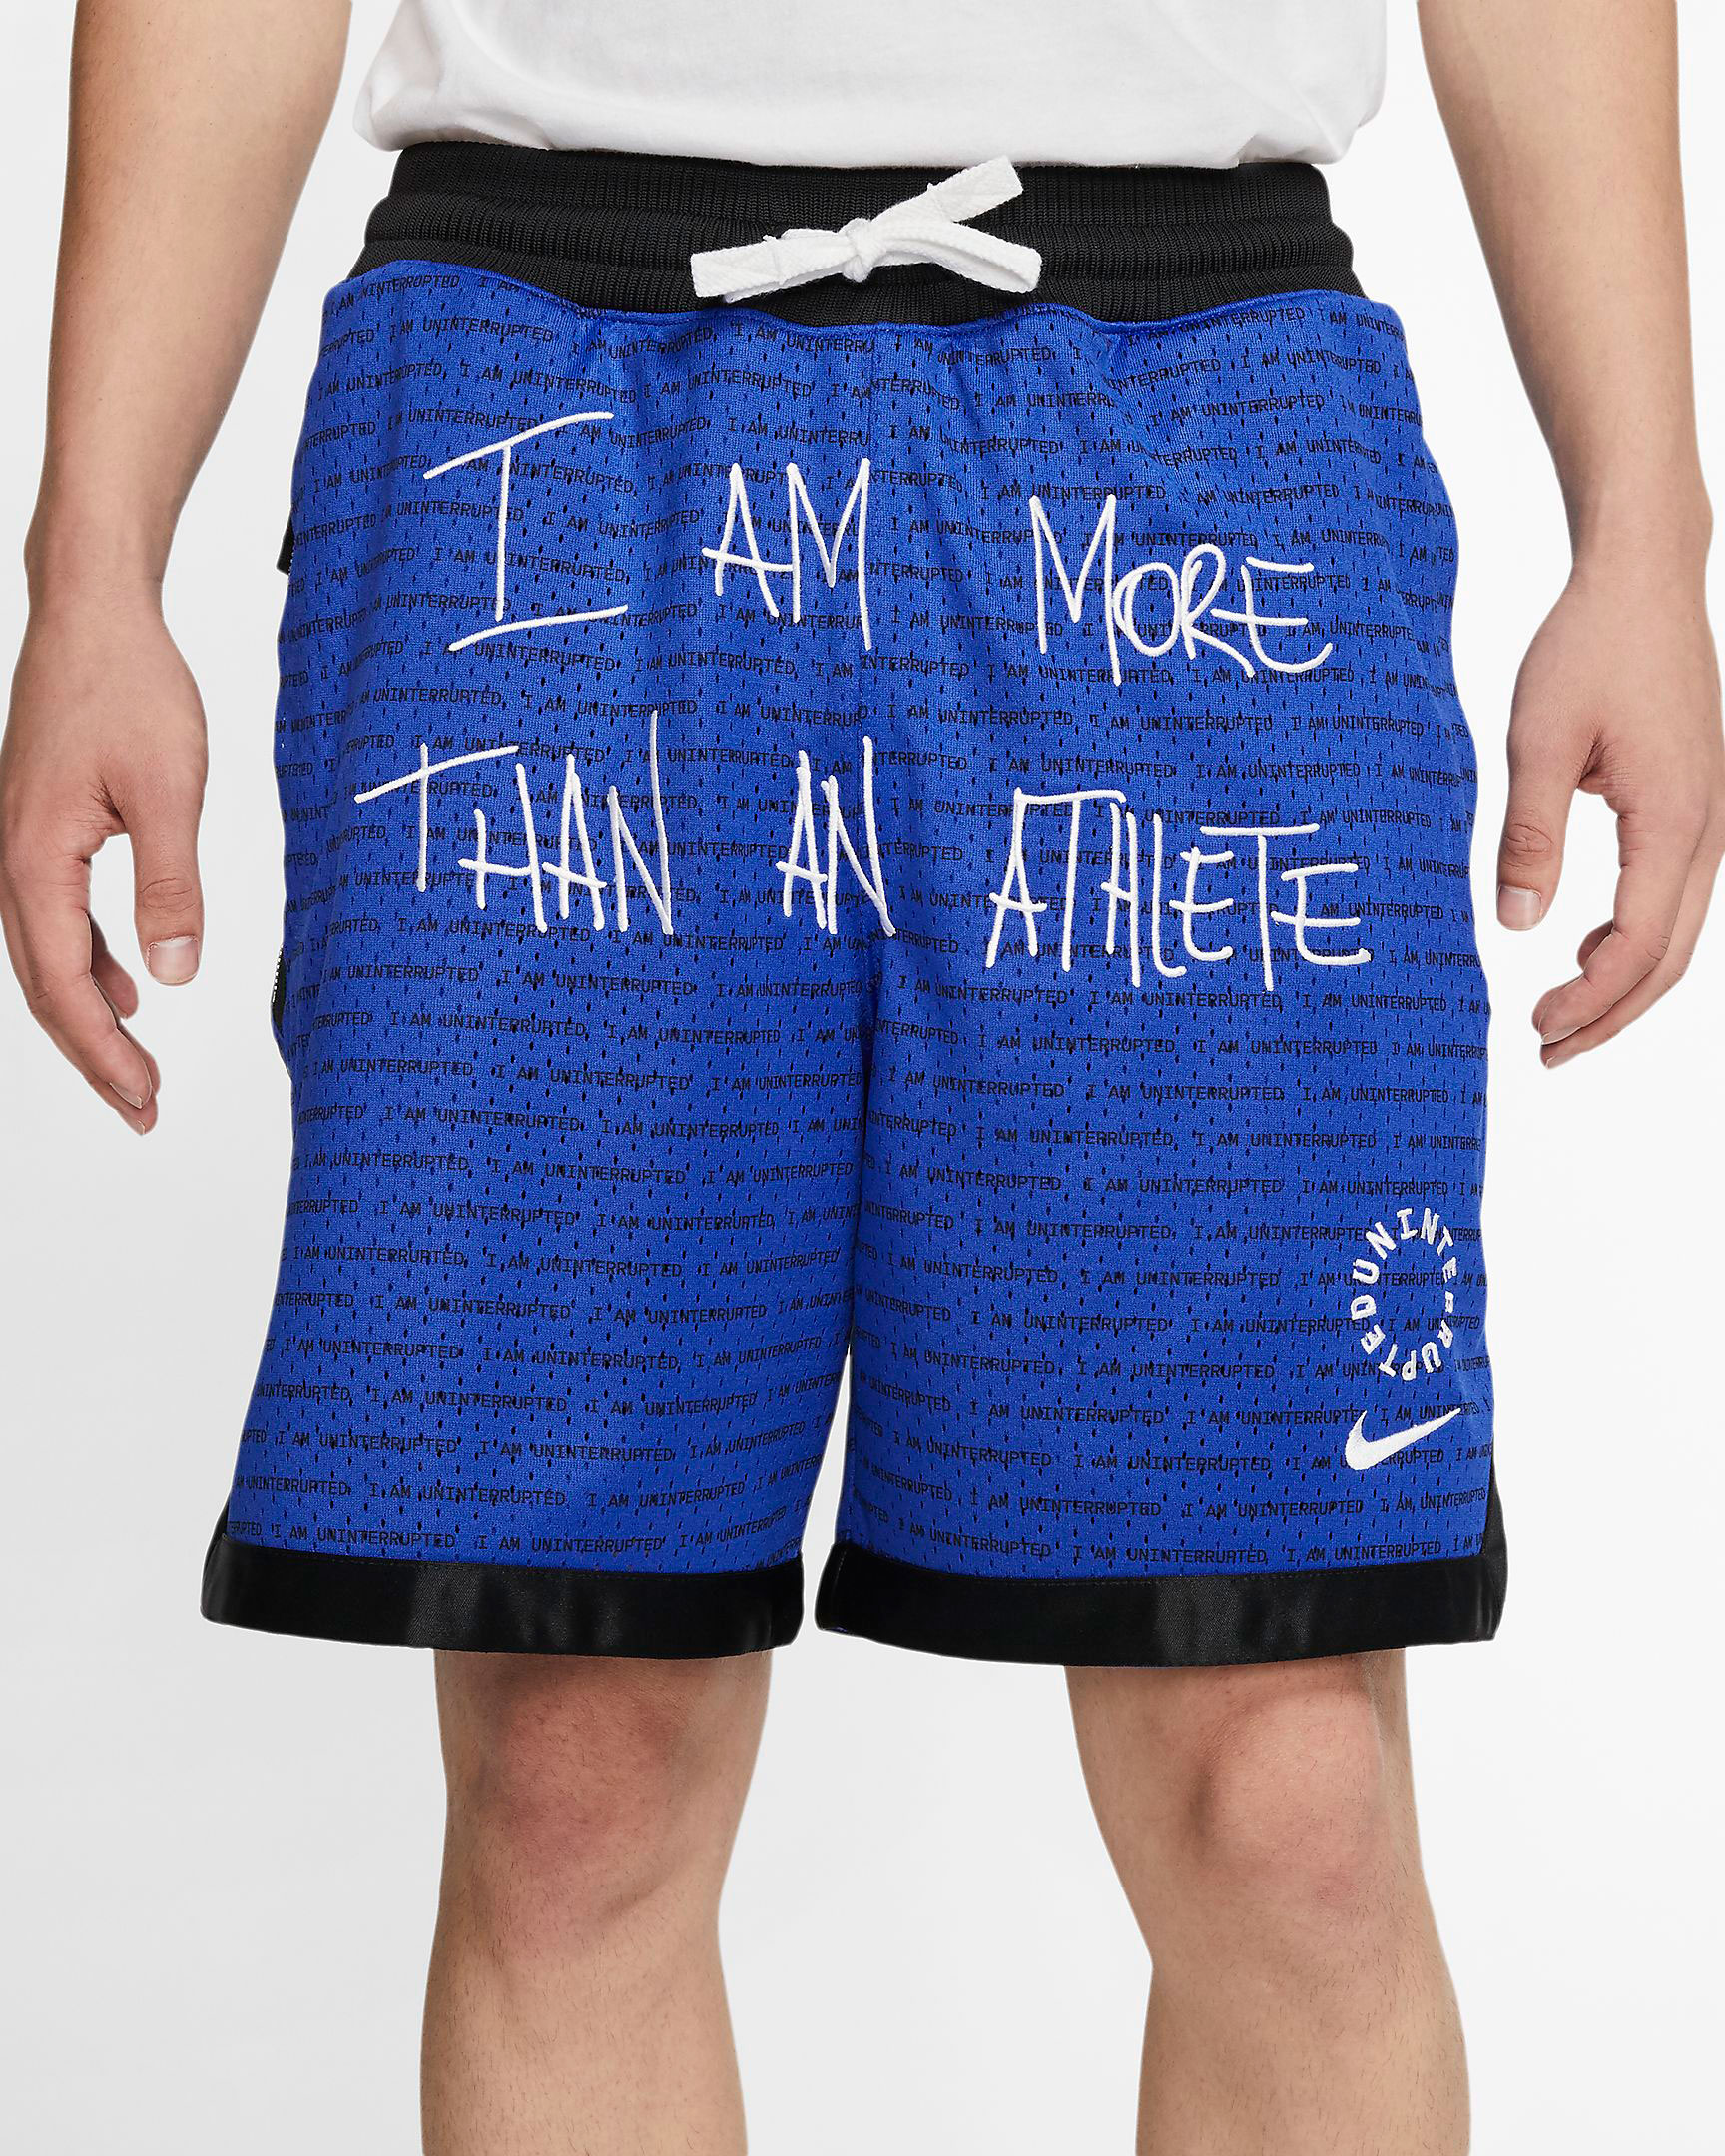 more than an athlete clothing